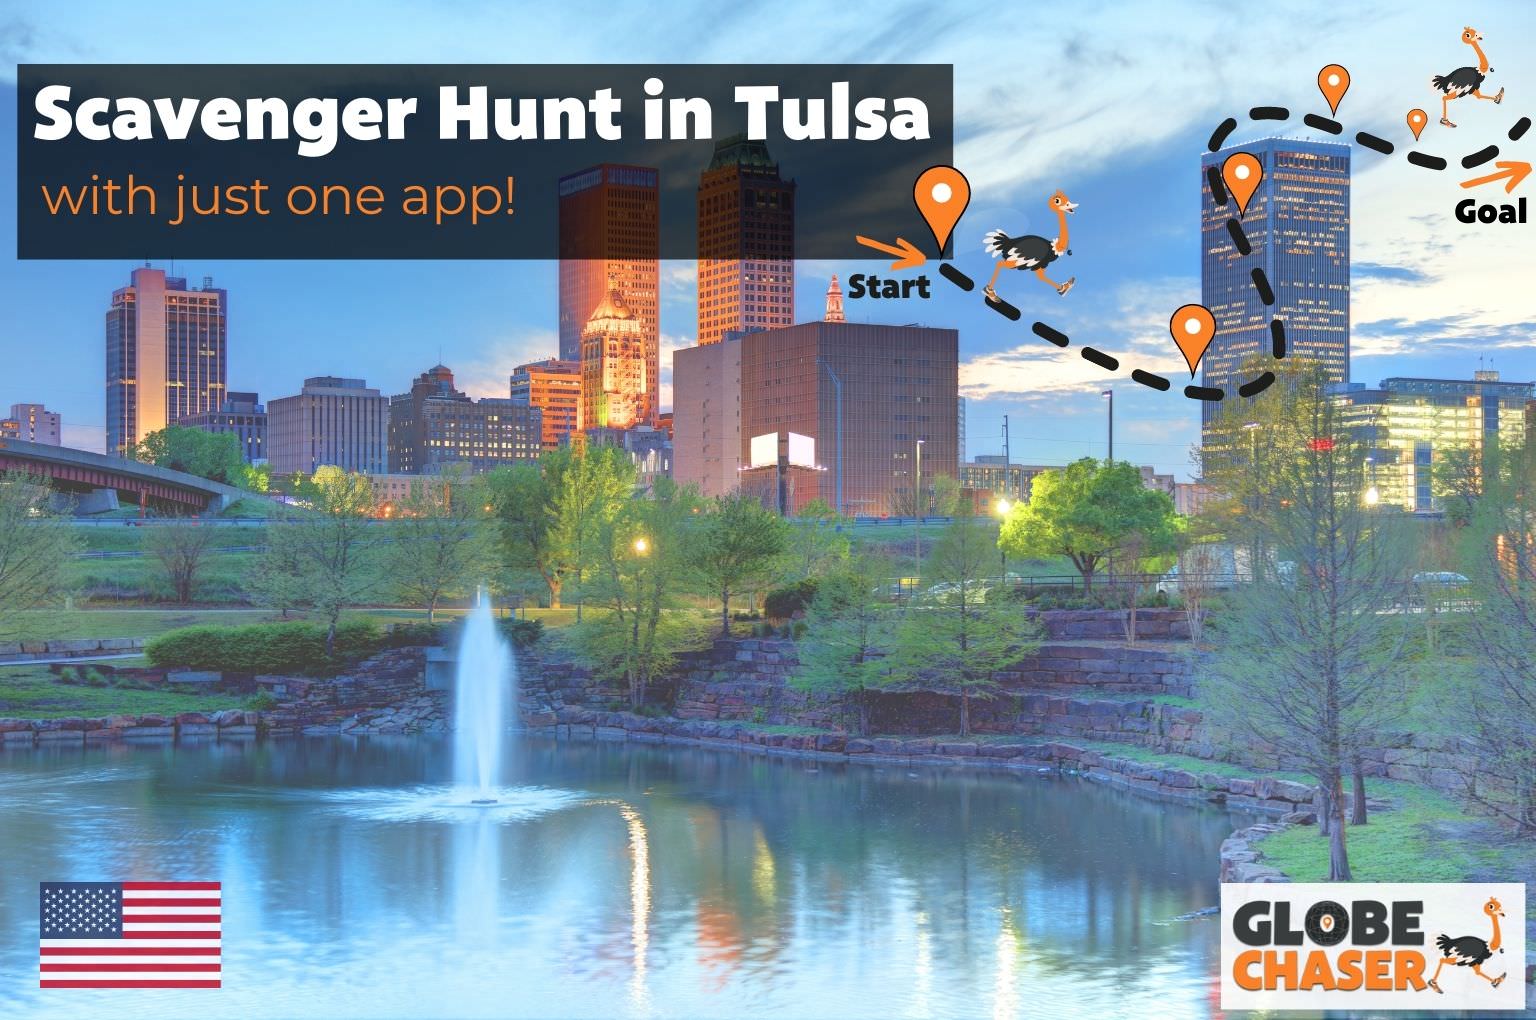 Scavenger Hunt in Tulsa, USA - Family Activities with the Globe Chaser App for Outdoor Fun